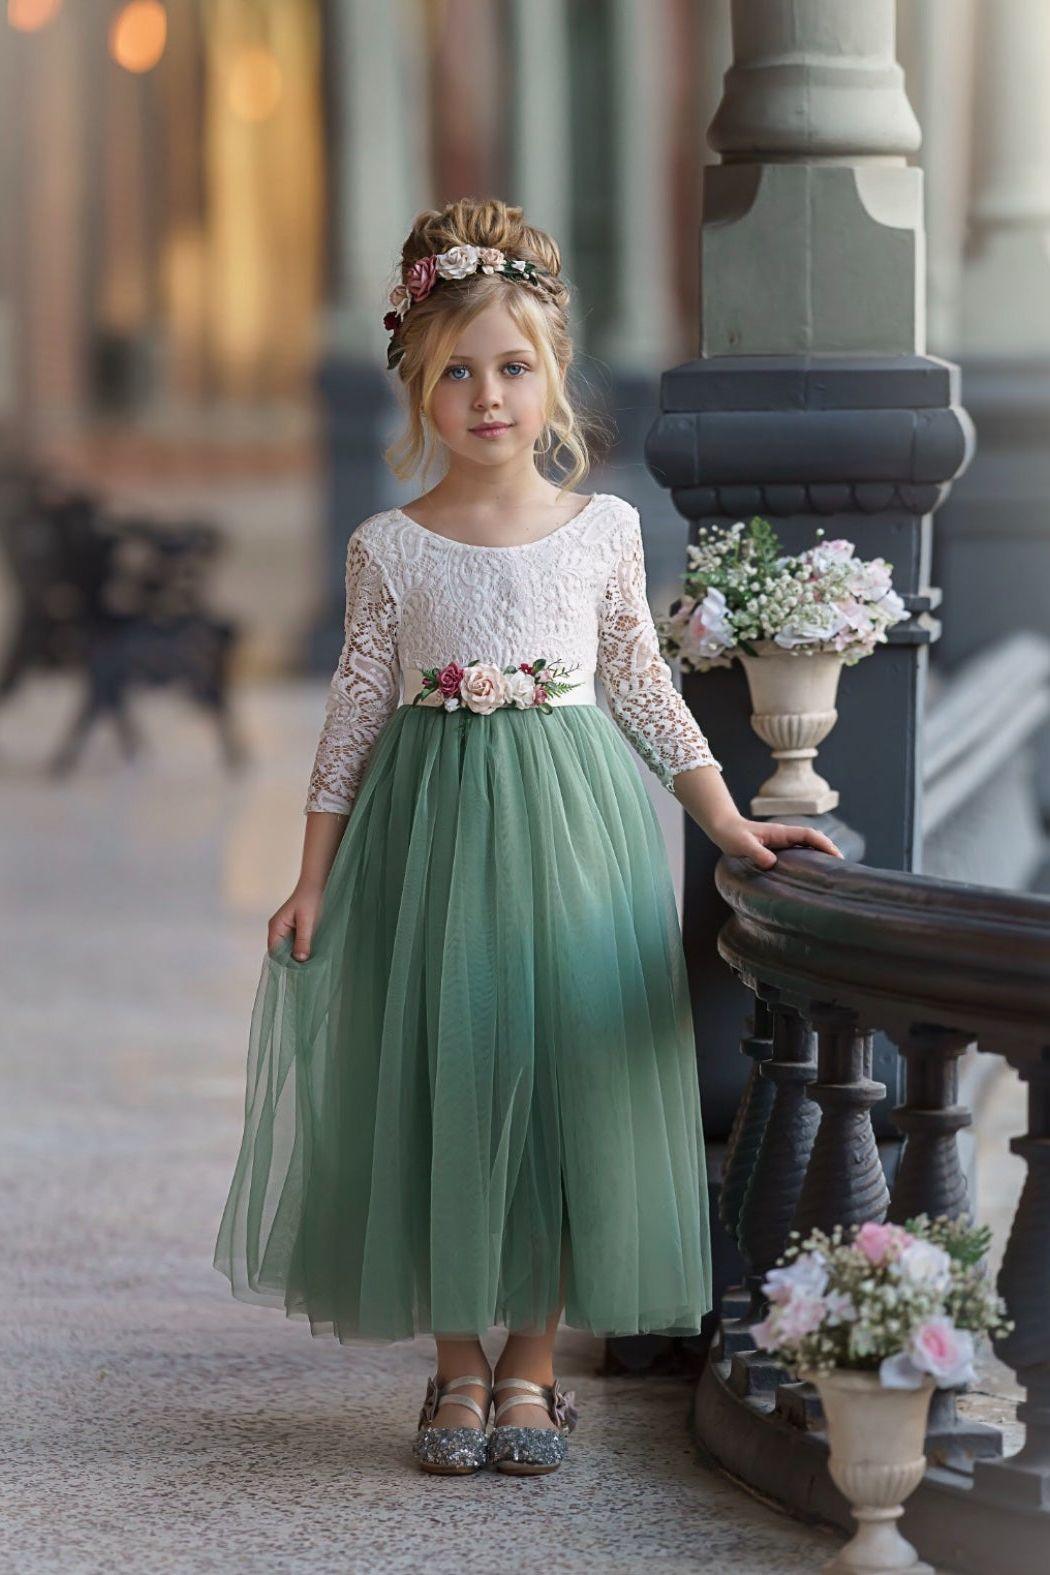 Sage tulle and lace Flower Girl dress - The Little Kitten Boutique